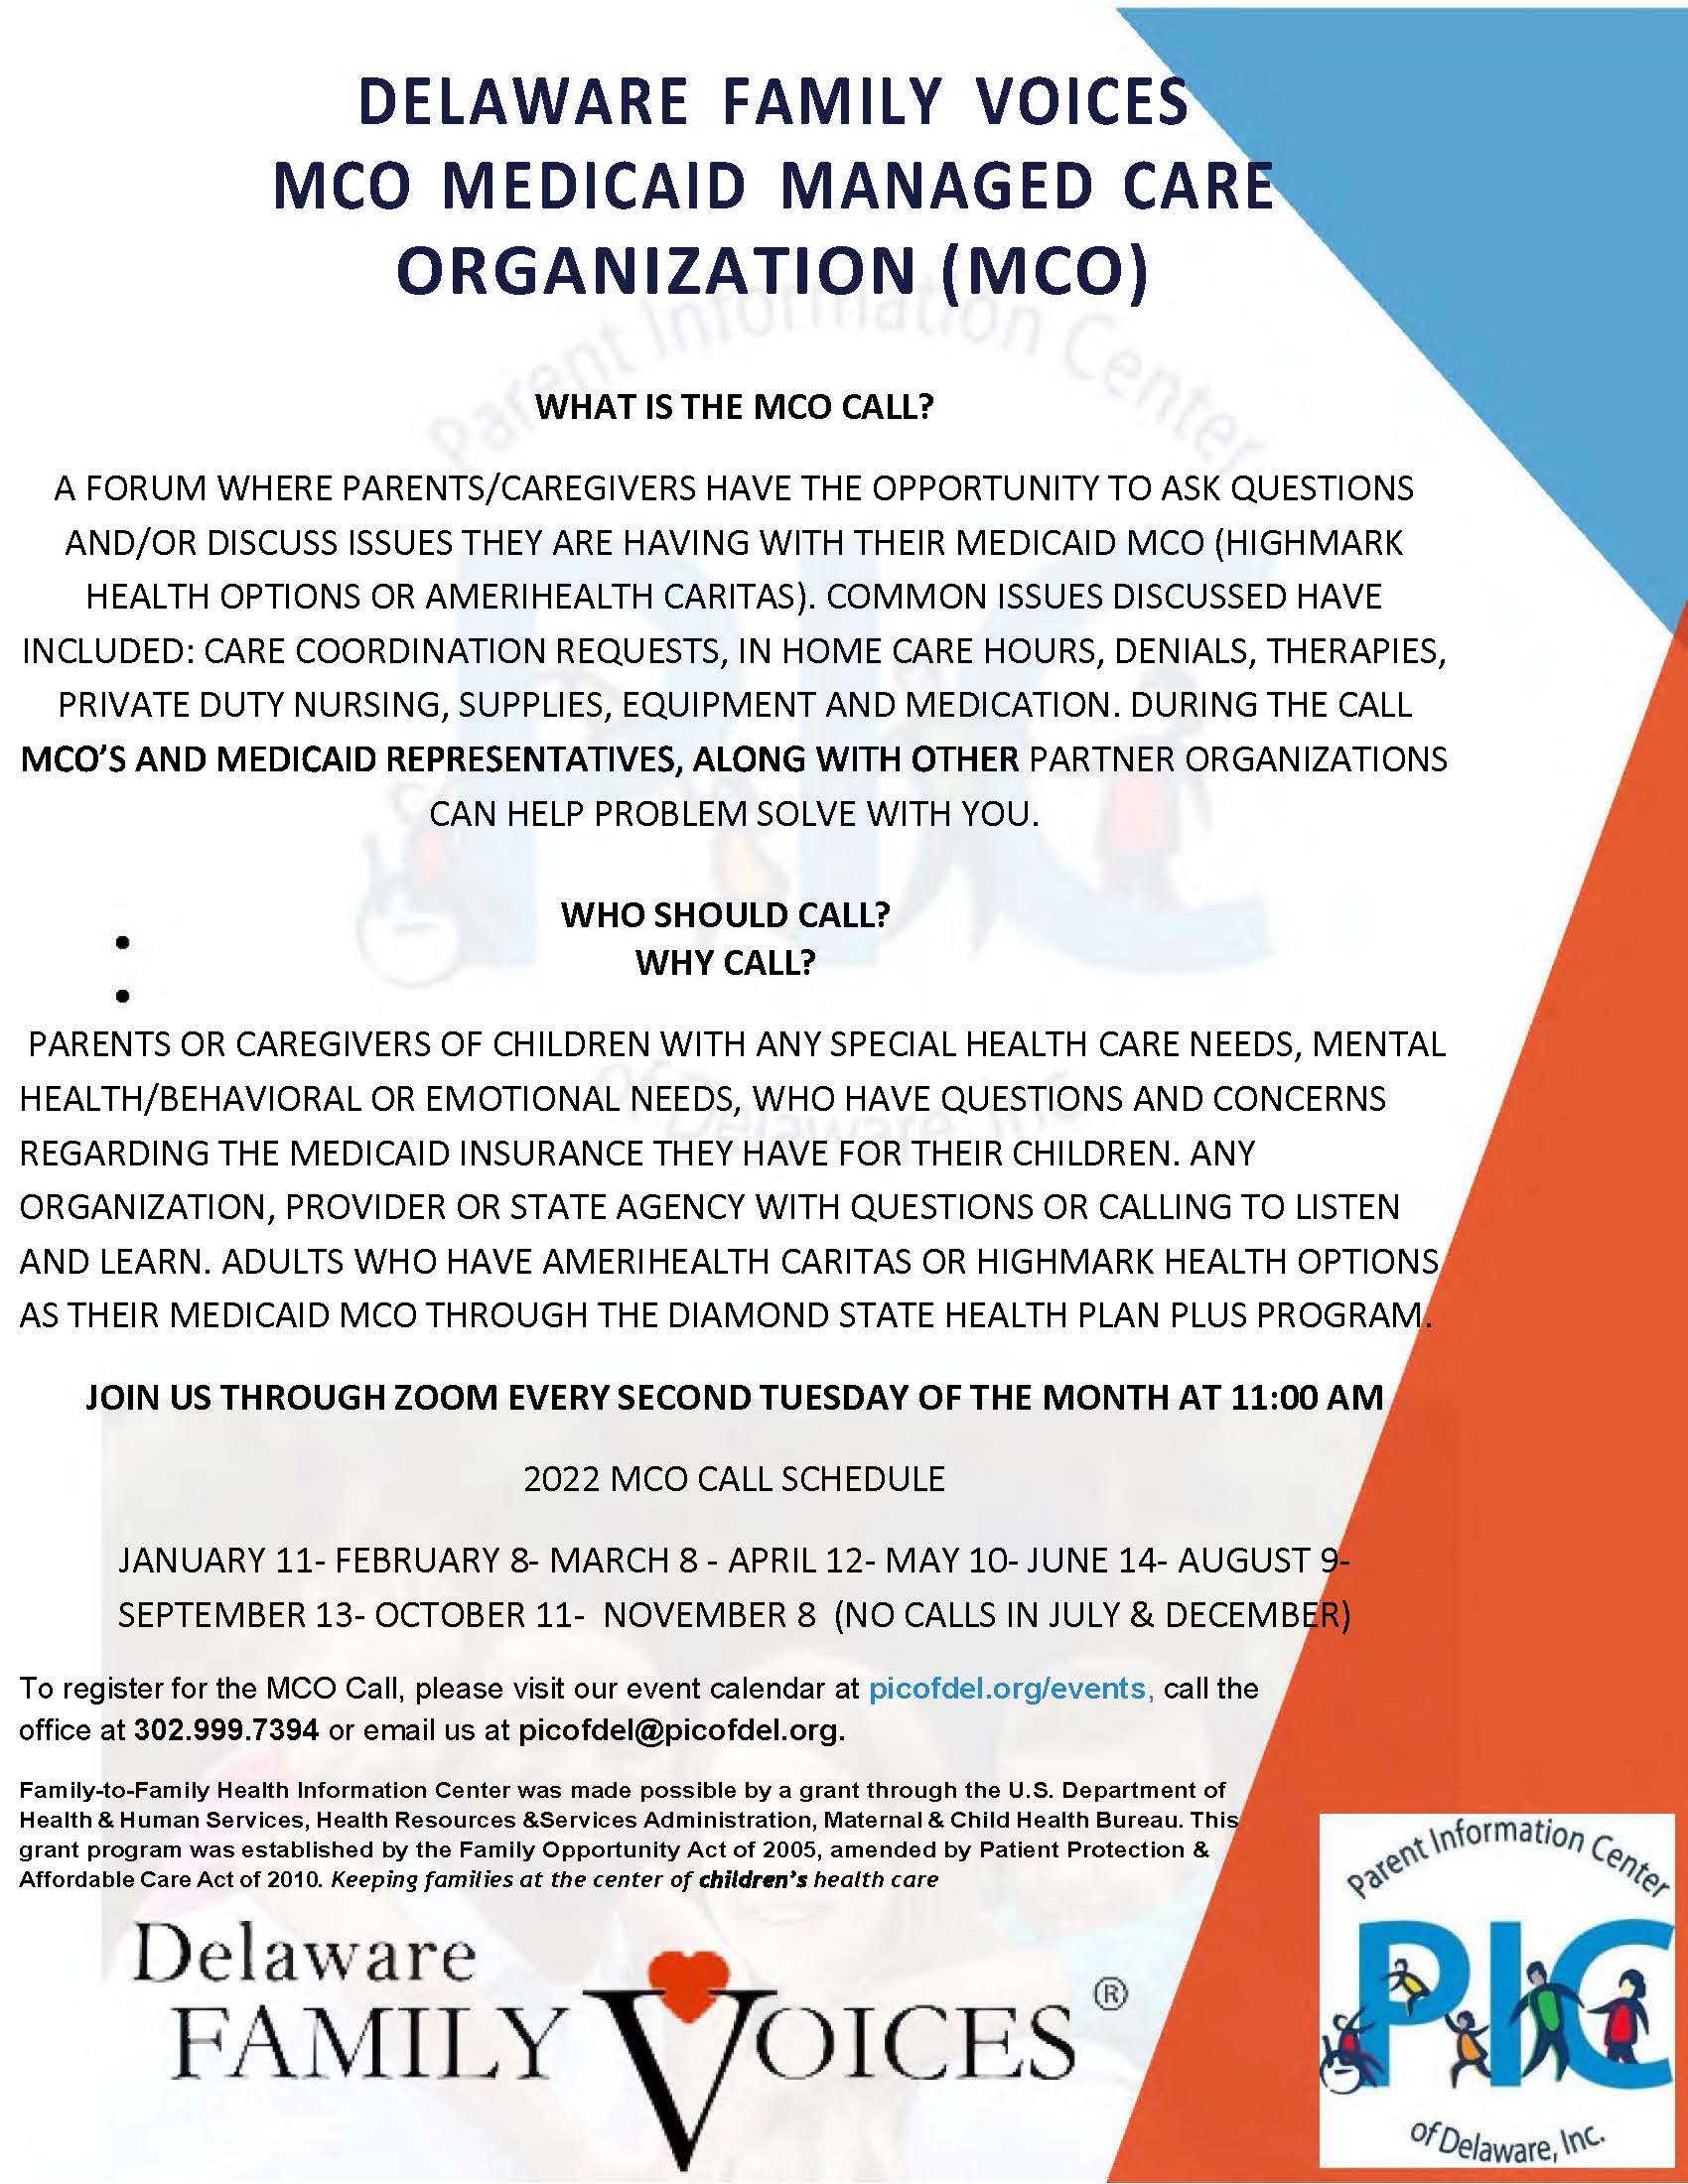 Managed Care Organization (MCO) Call